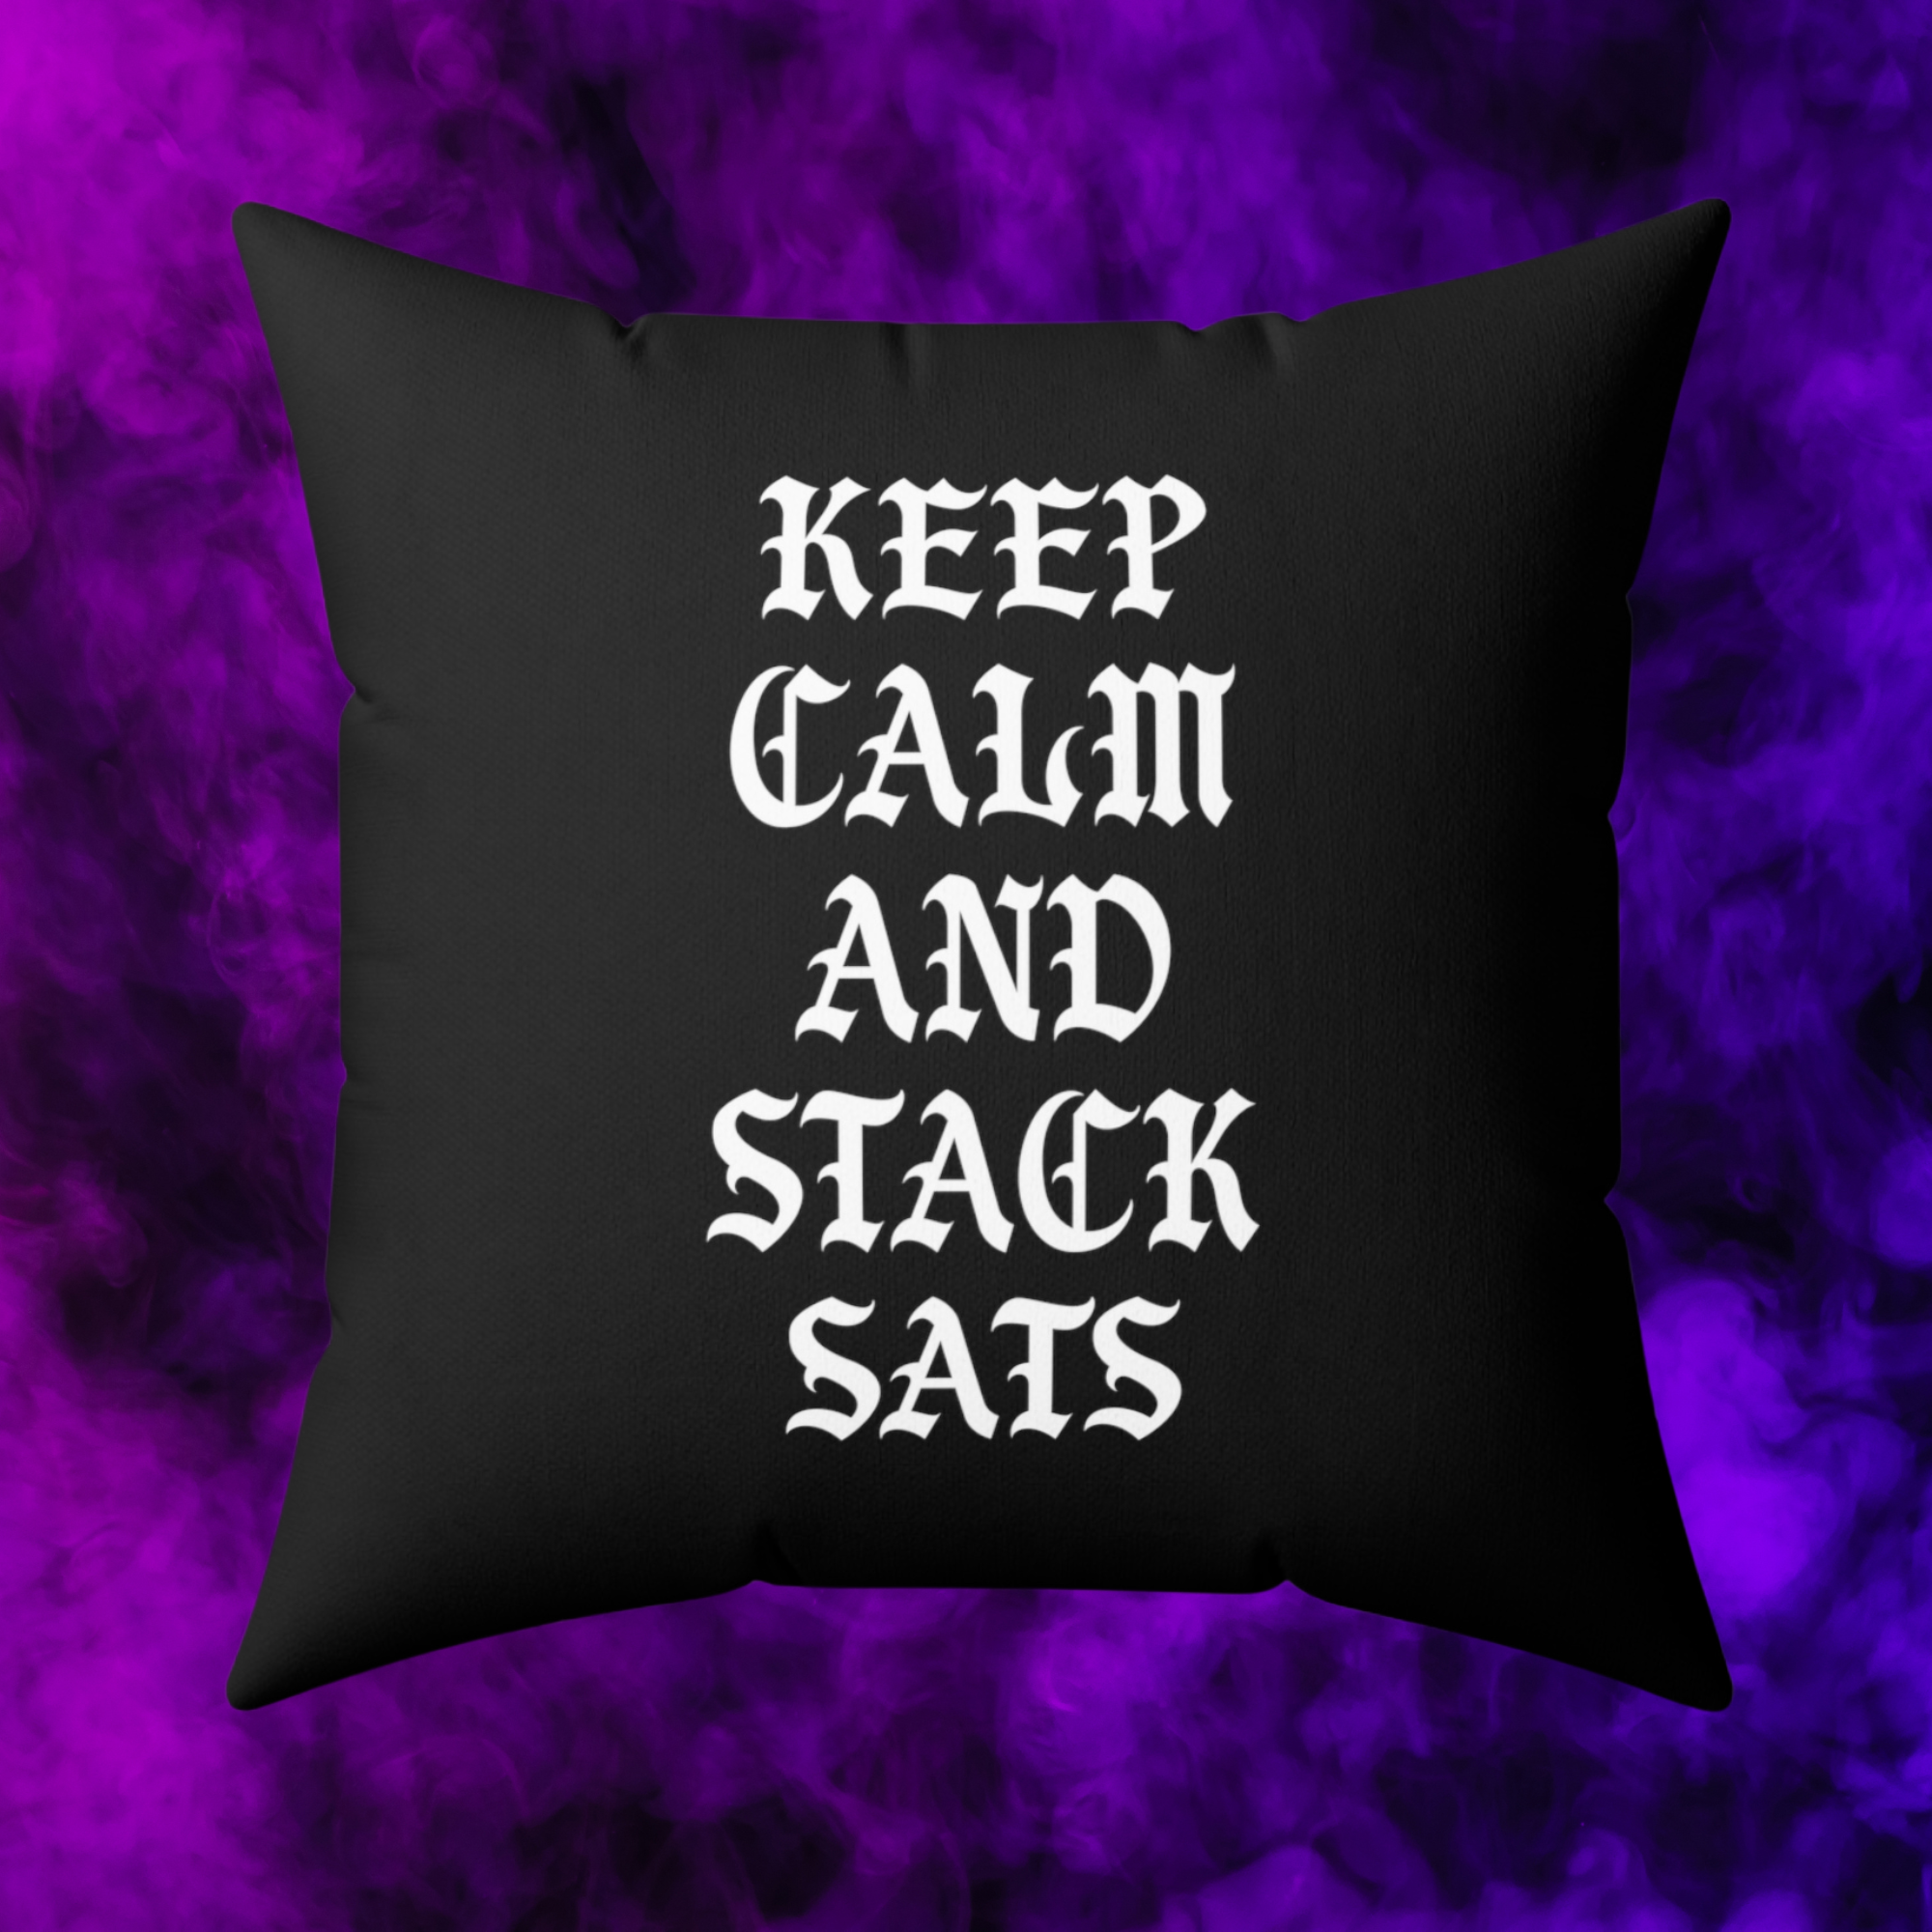  Bitcoin Home Decor - Keep Calm And Stack Sats Pillow (Gothic Style) available from NEONCRYPTO STORE.